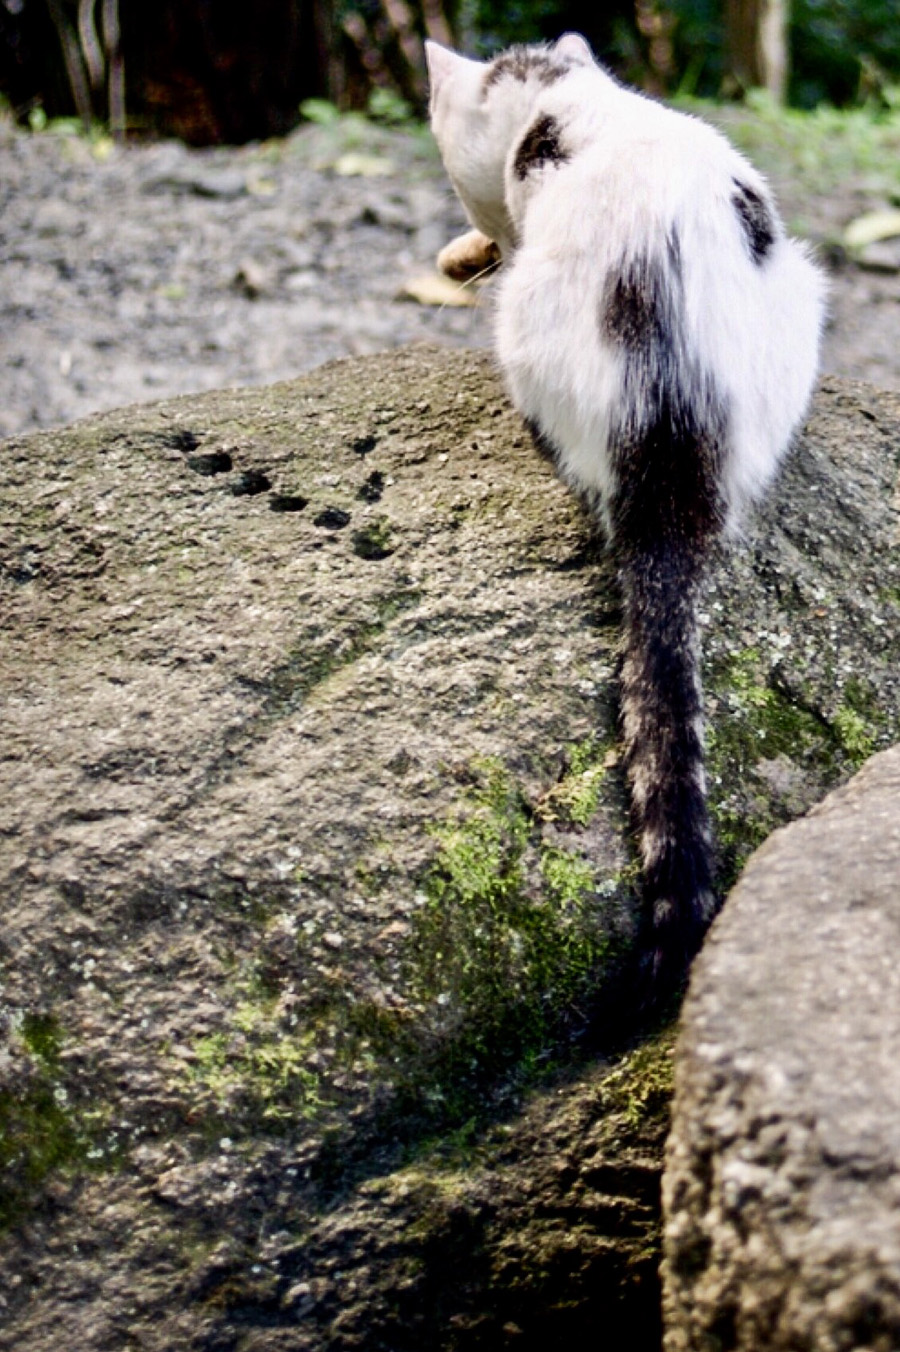 A cat with no given name, enjoys many names given by locals and tourists alike